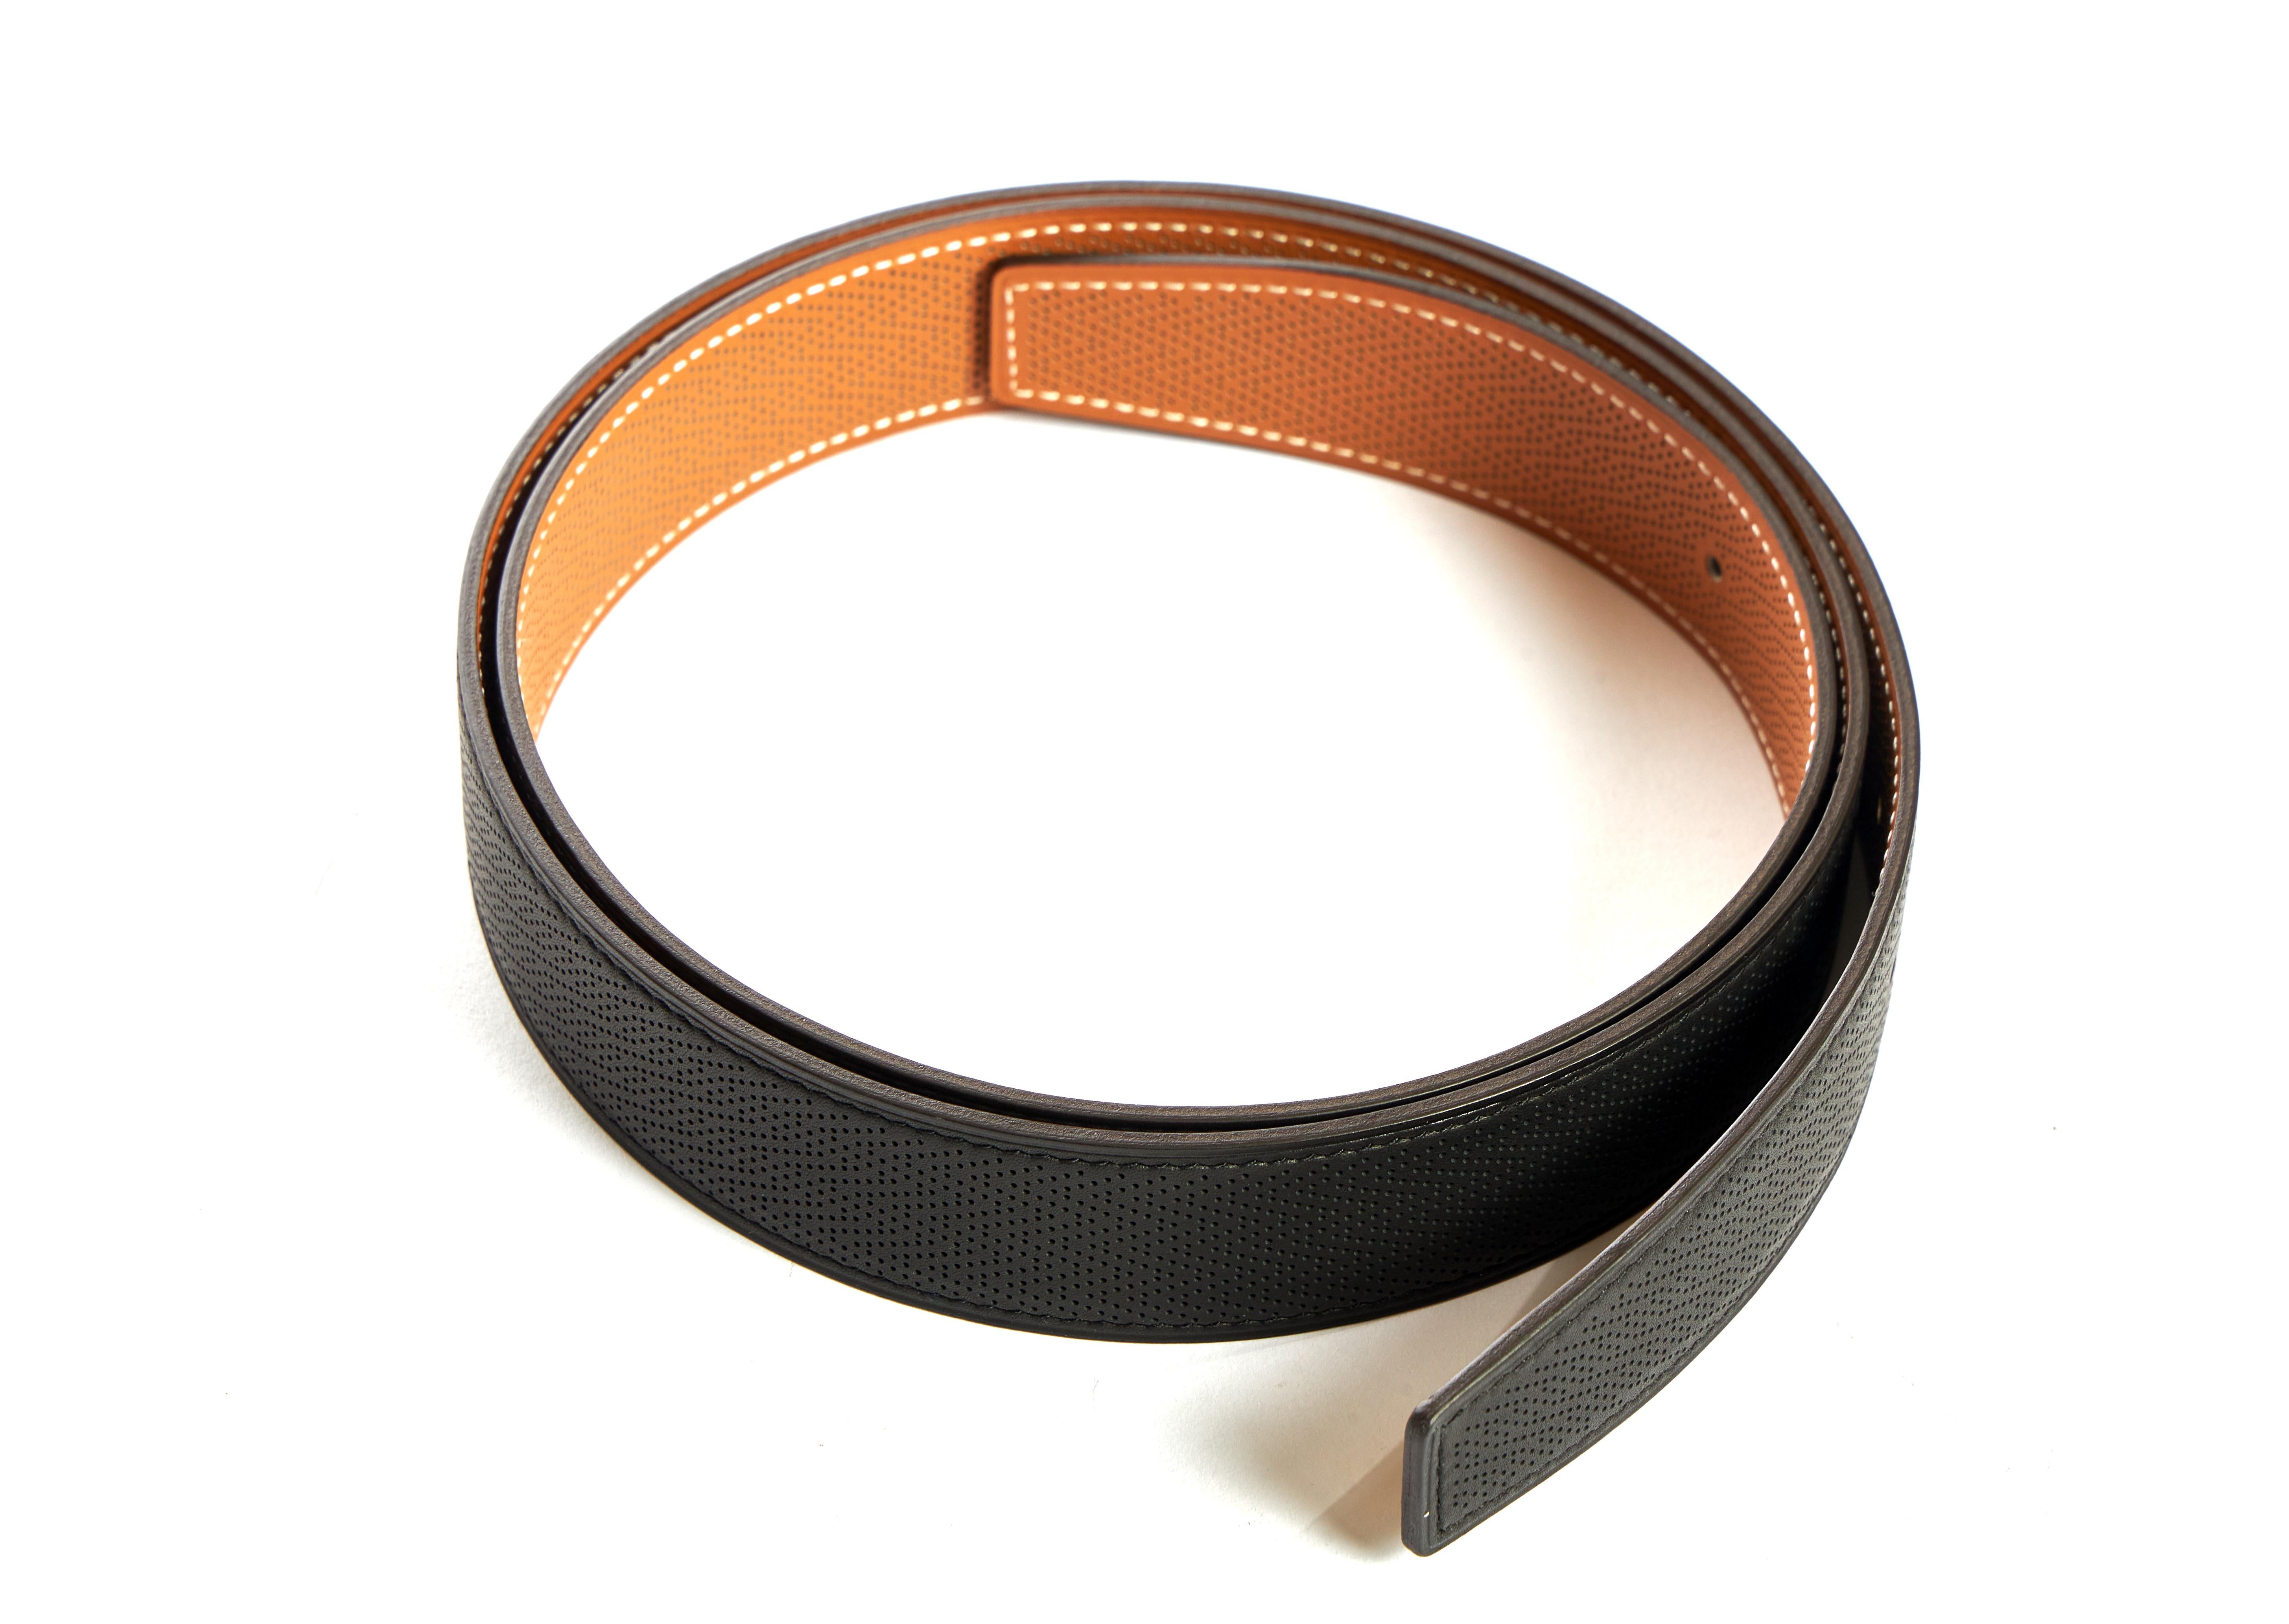 Hermès brand new limited edition reversible leather strap for medium 32mm H belt. Black and gold perforated leather. 100cm. Comes with original box.